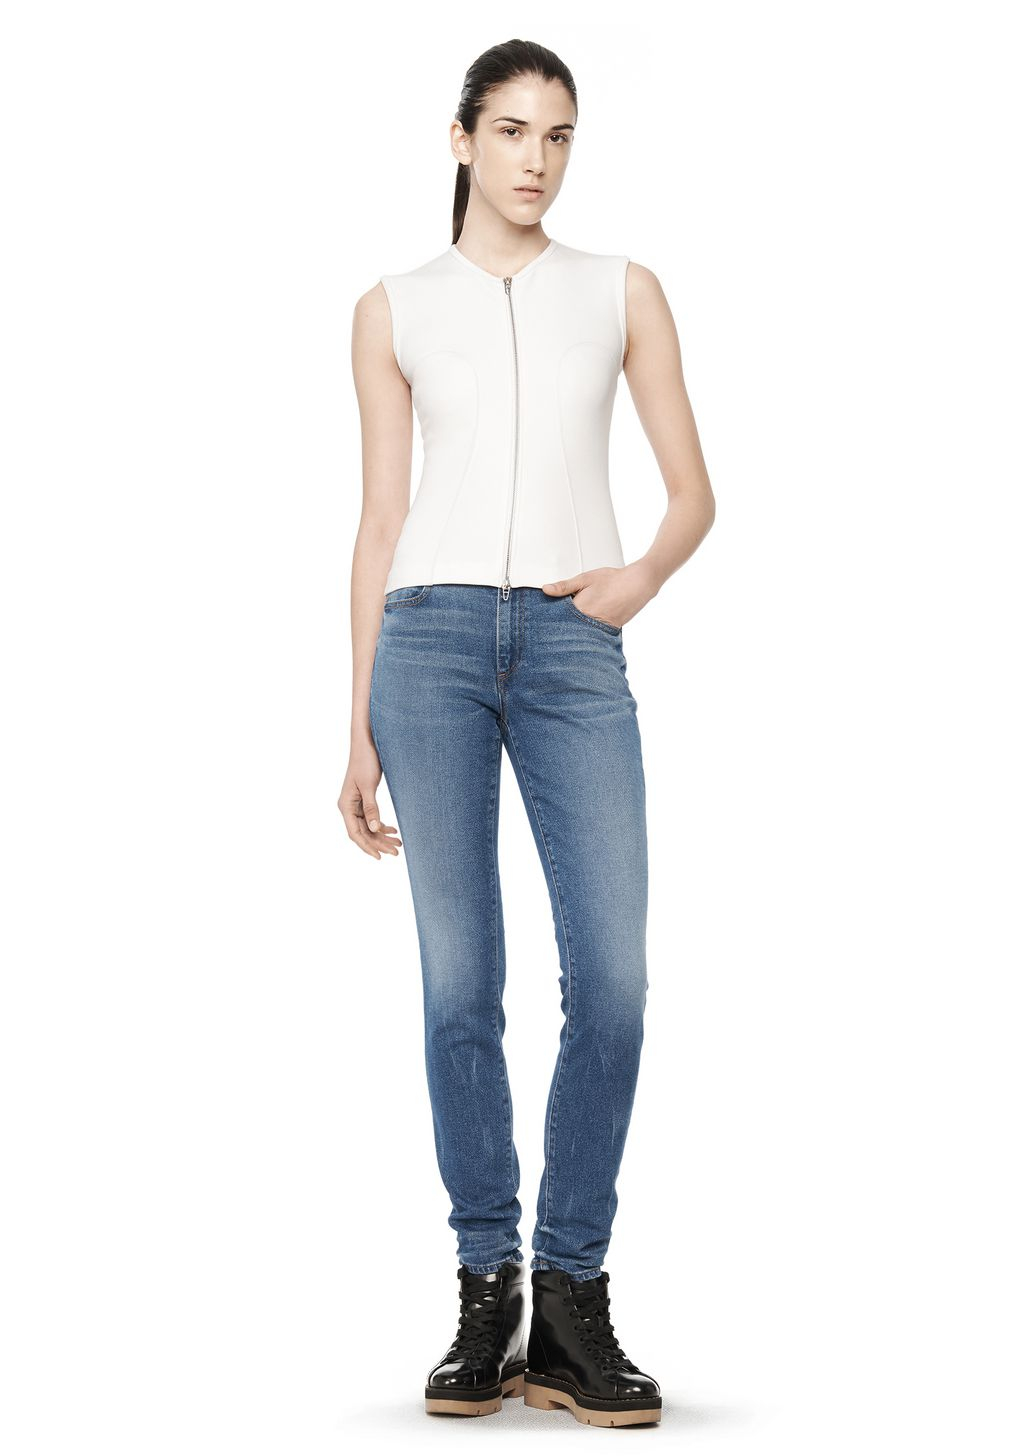 Alexander wang Knit Twill Sleeveless Top in White | Lyst